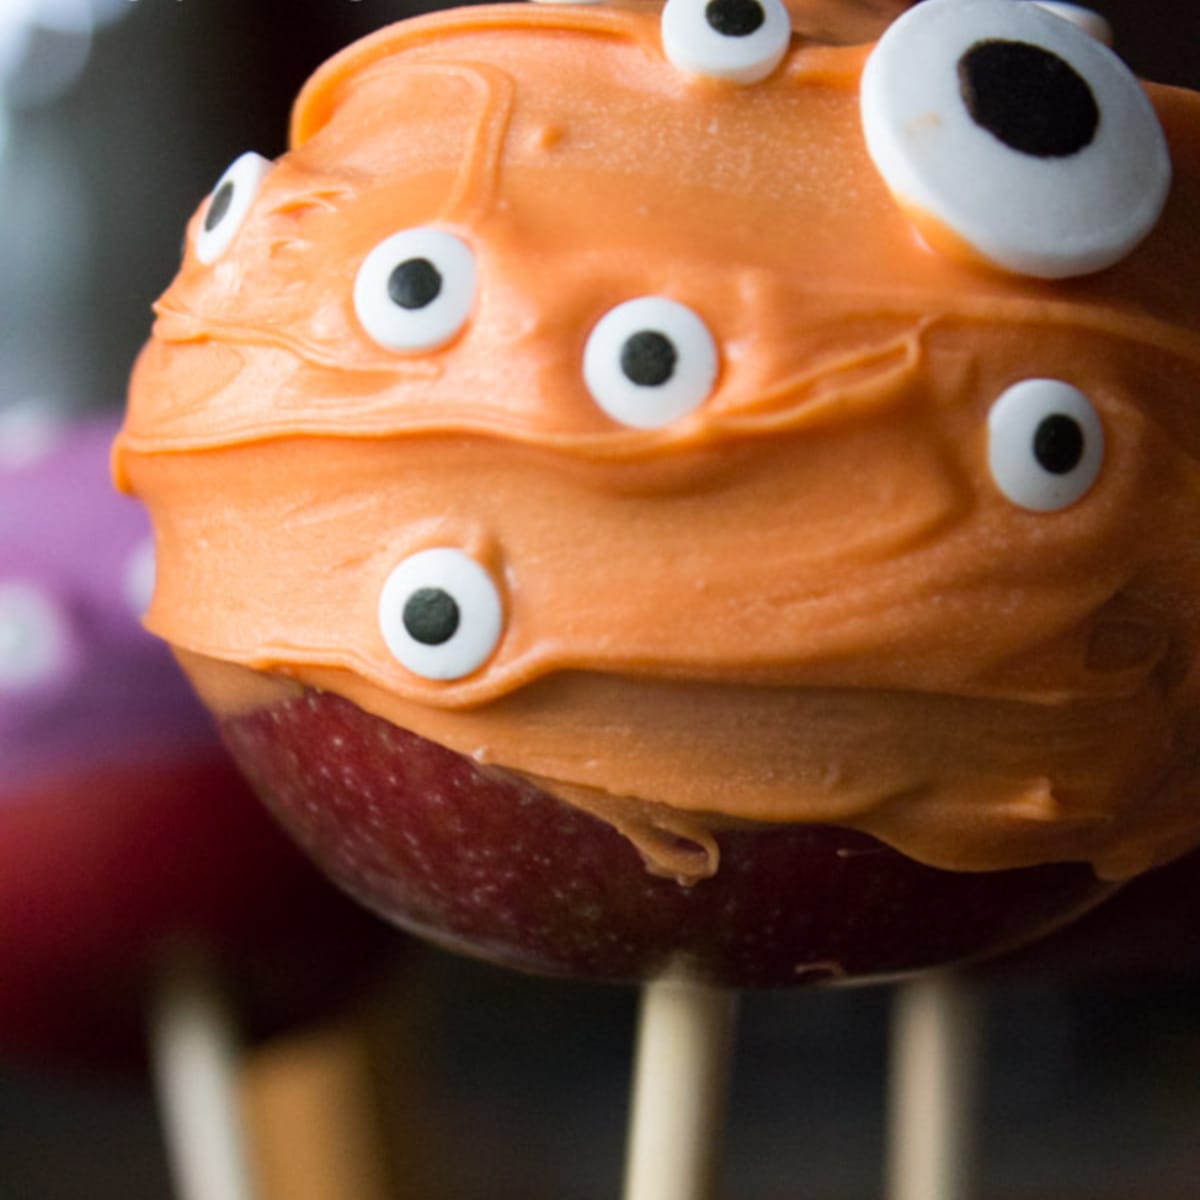 Creepy Eyeballs Candy-Coated Apples — Hungry Enough To Eat Six